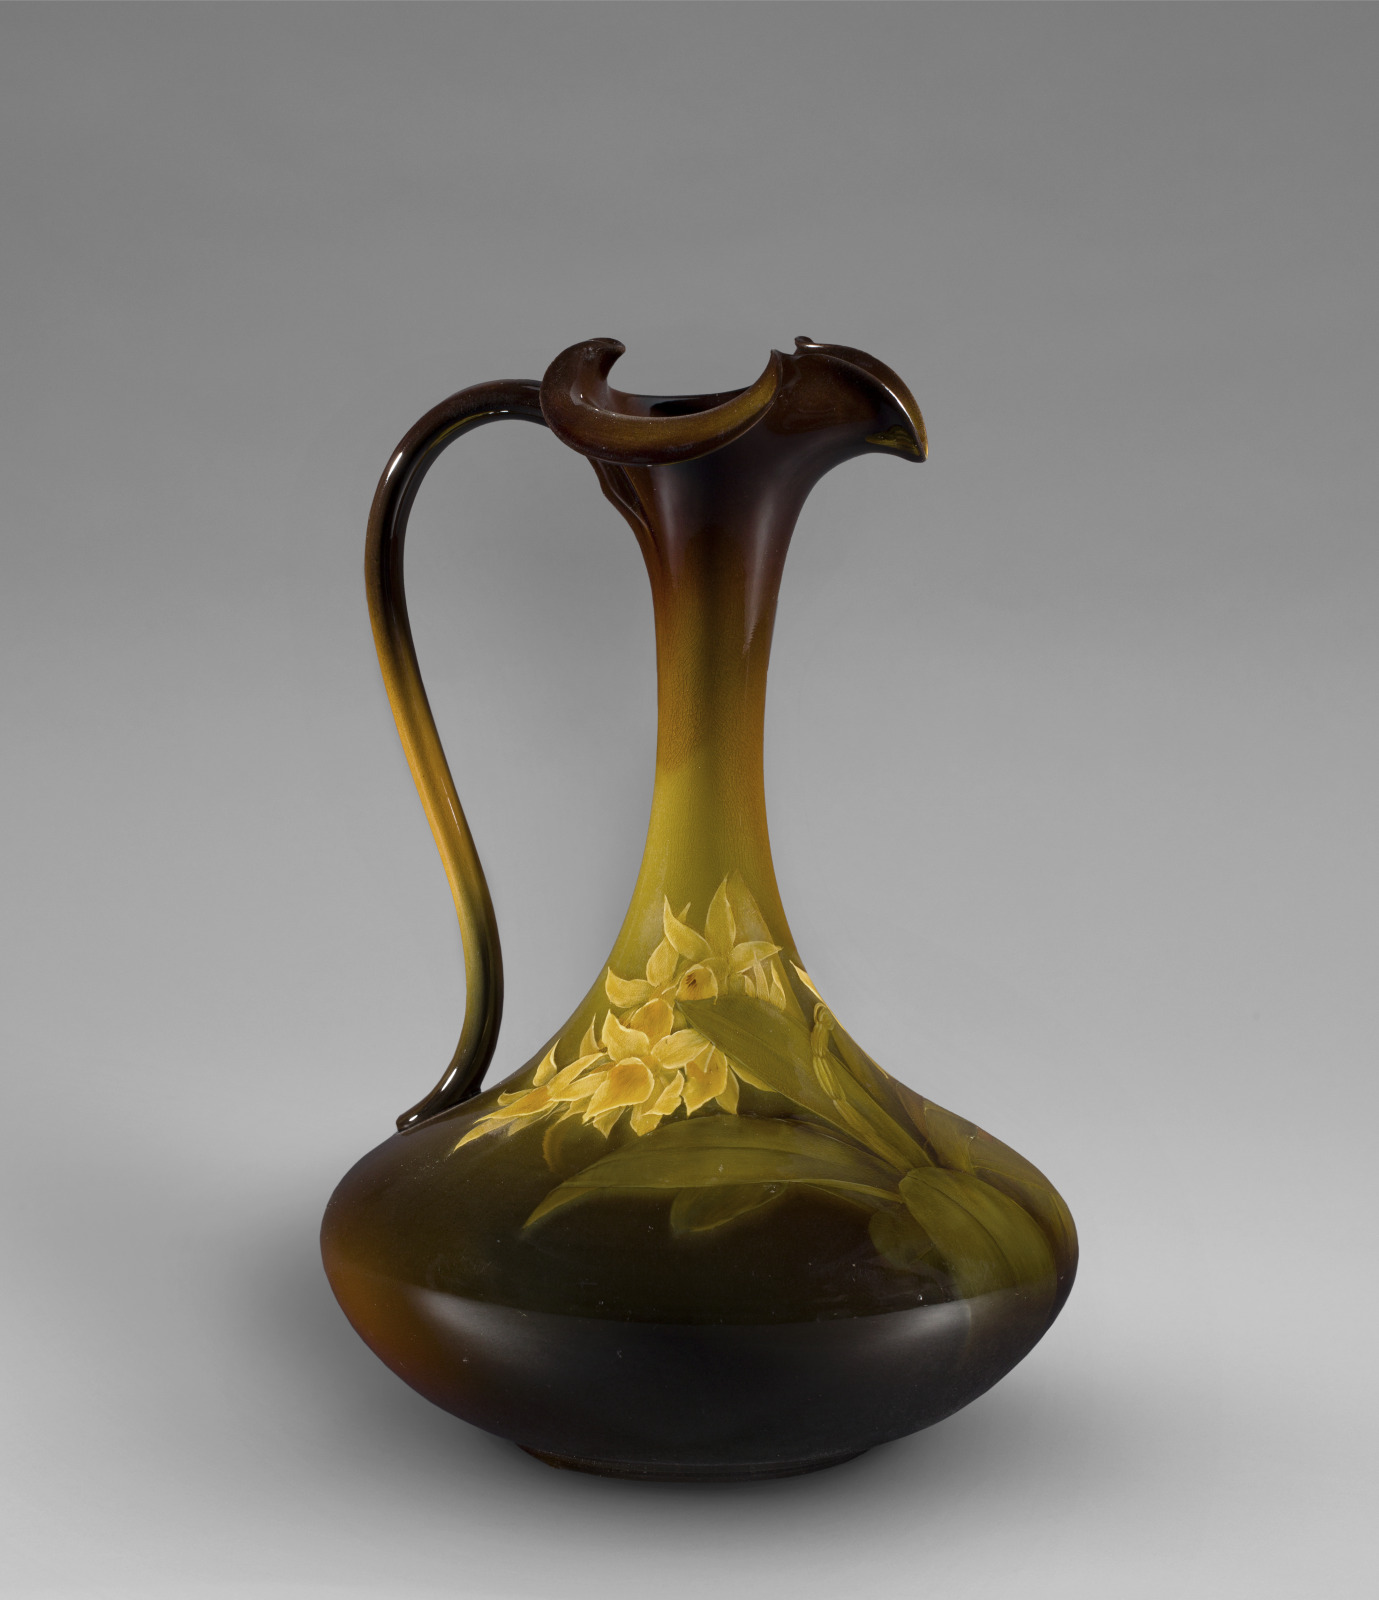 Object of the Day - Saint Louis Art Museum